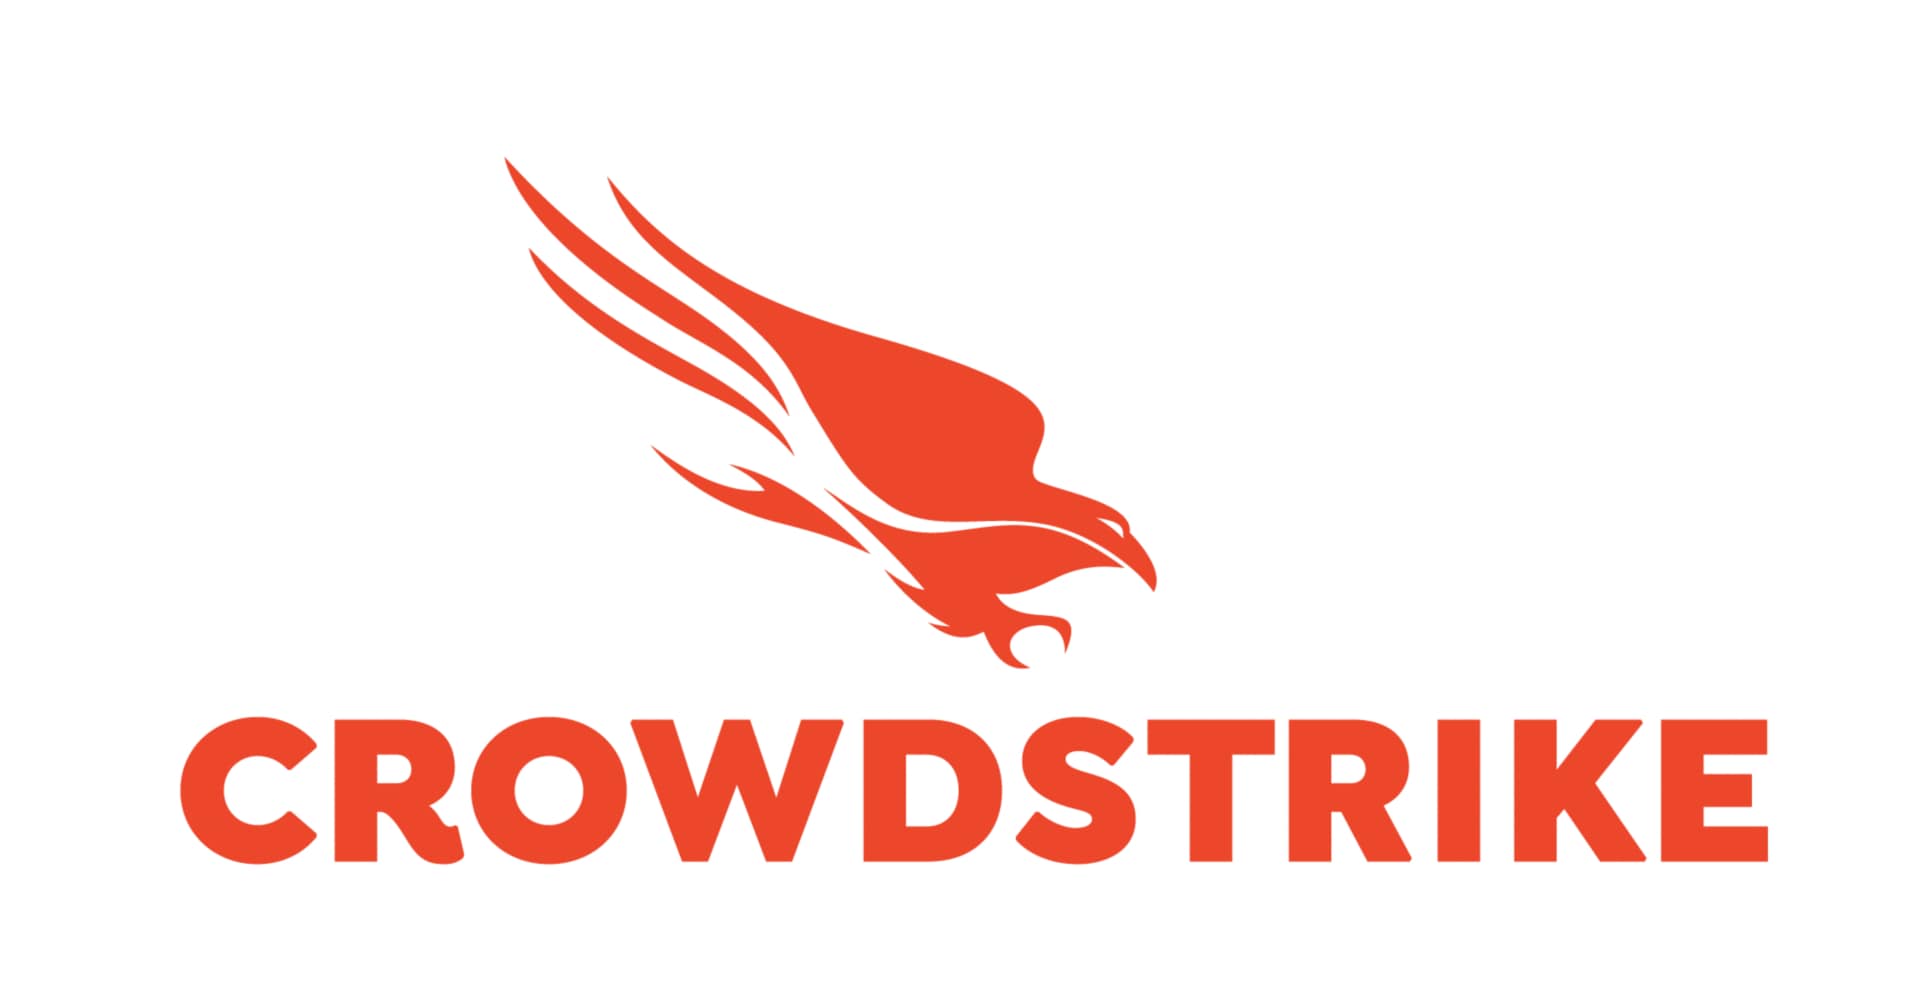 CrowdStrike 22-Month Express Support